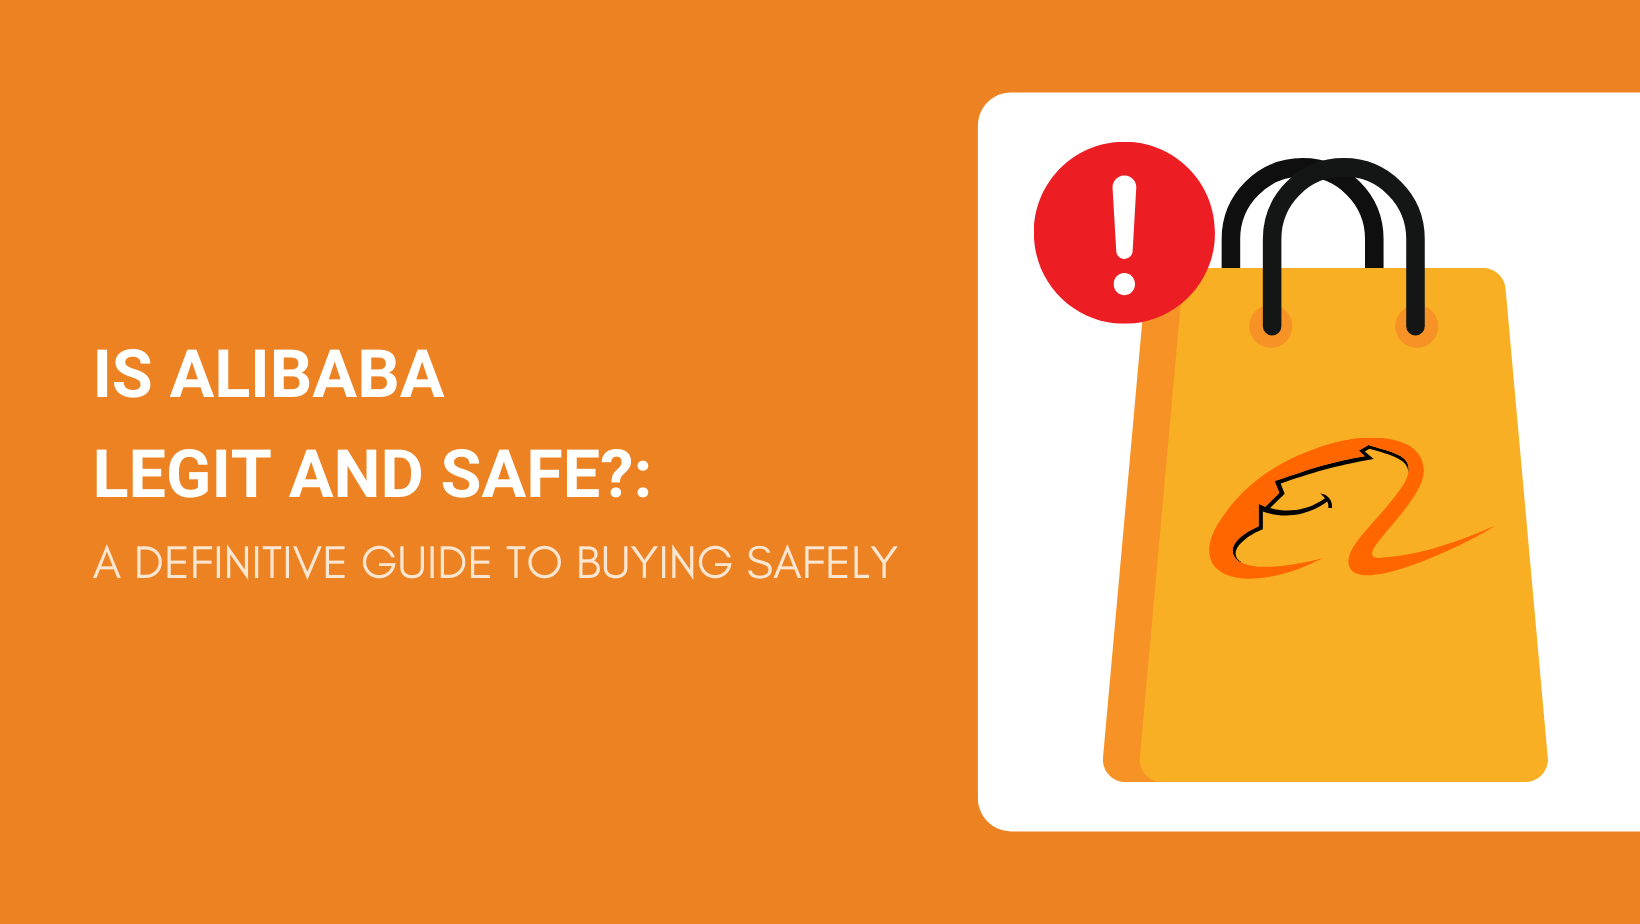 Is Alibaba Legit and Safe?: A Definitive Guide to Buying Safely